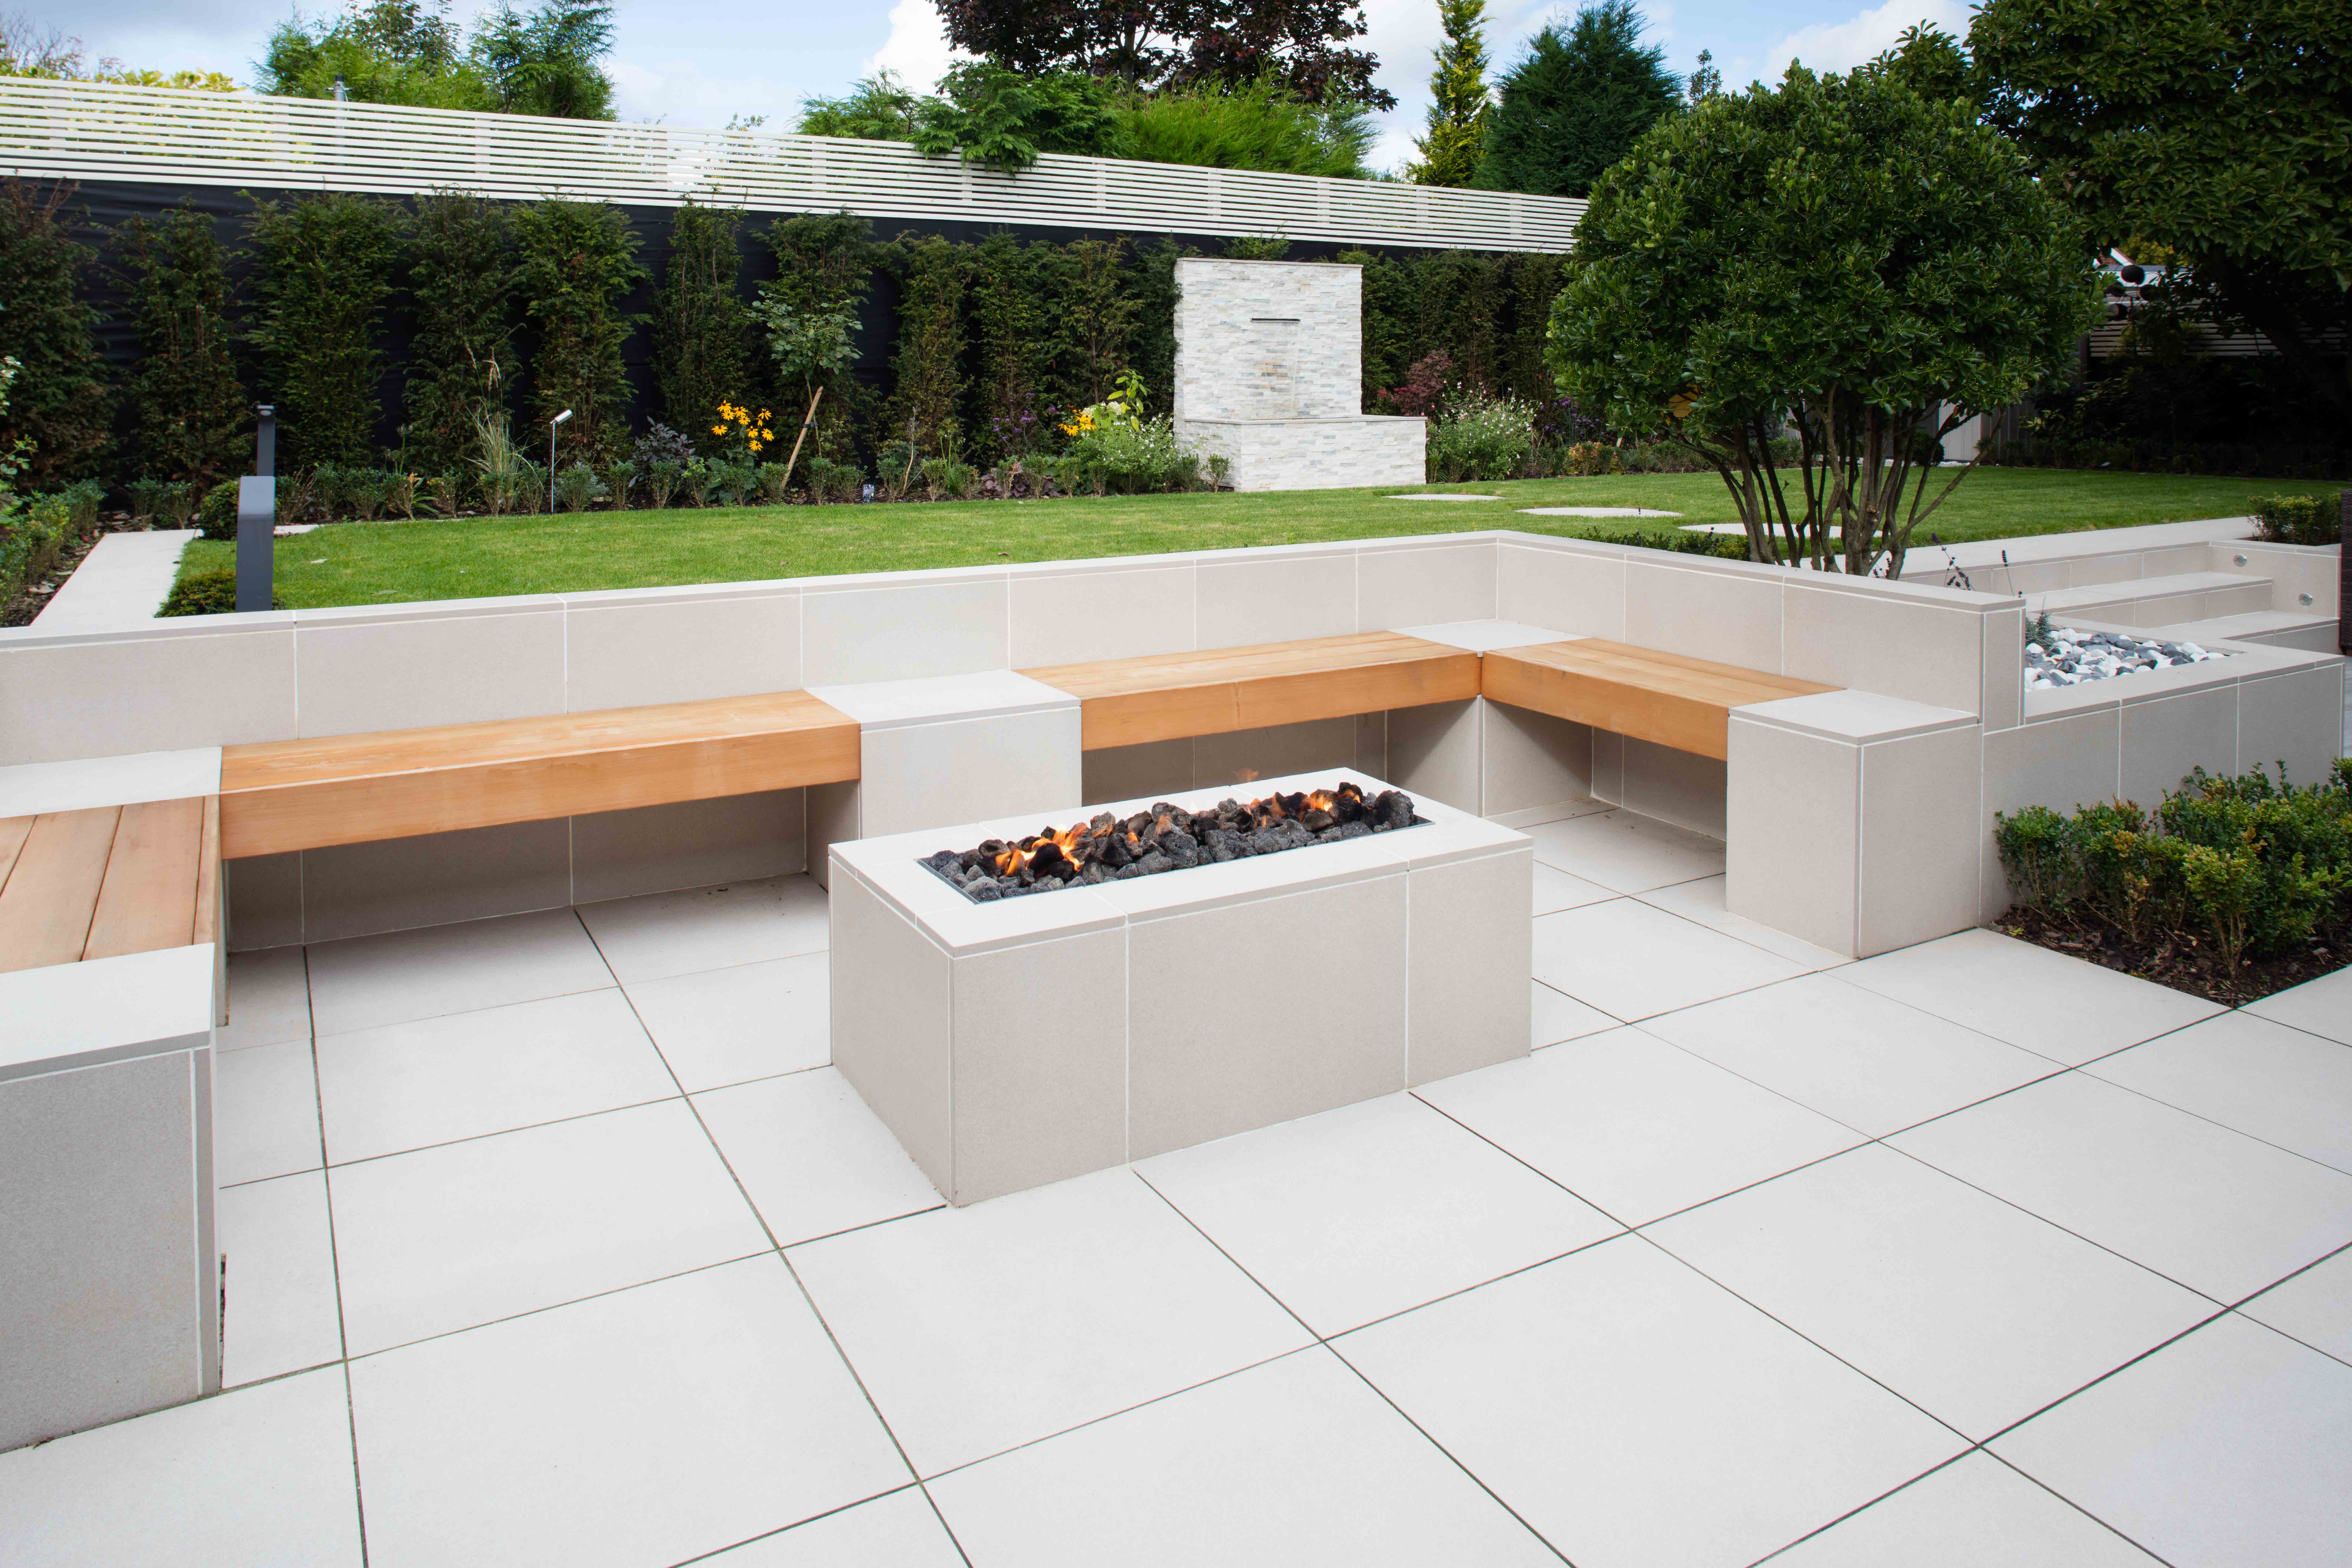 A firepit in the middle of a light-coloured garden paving area